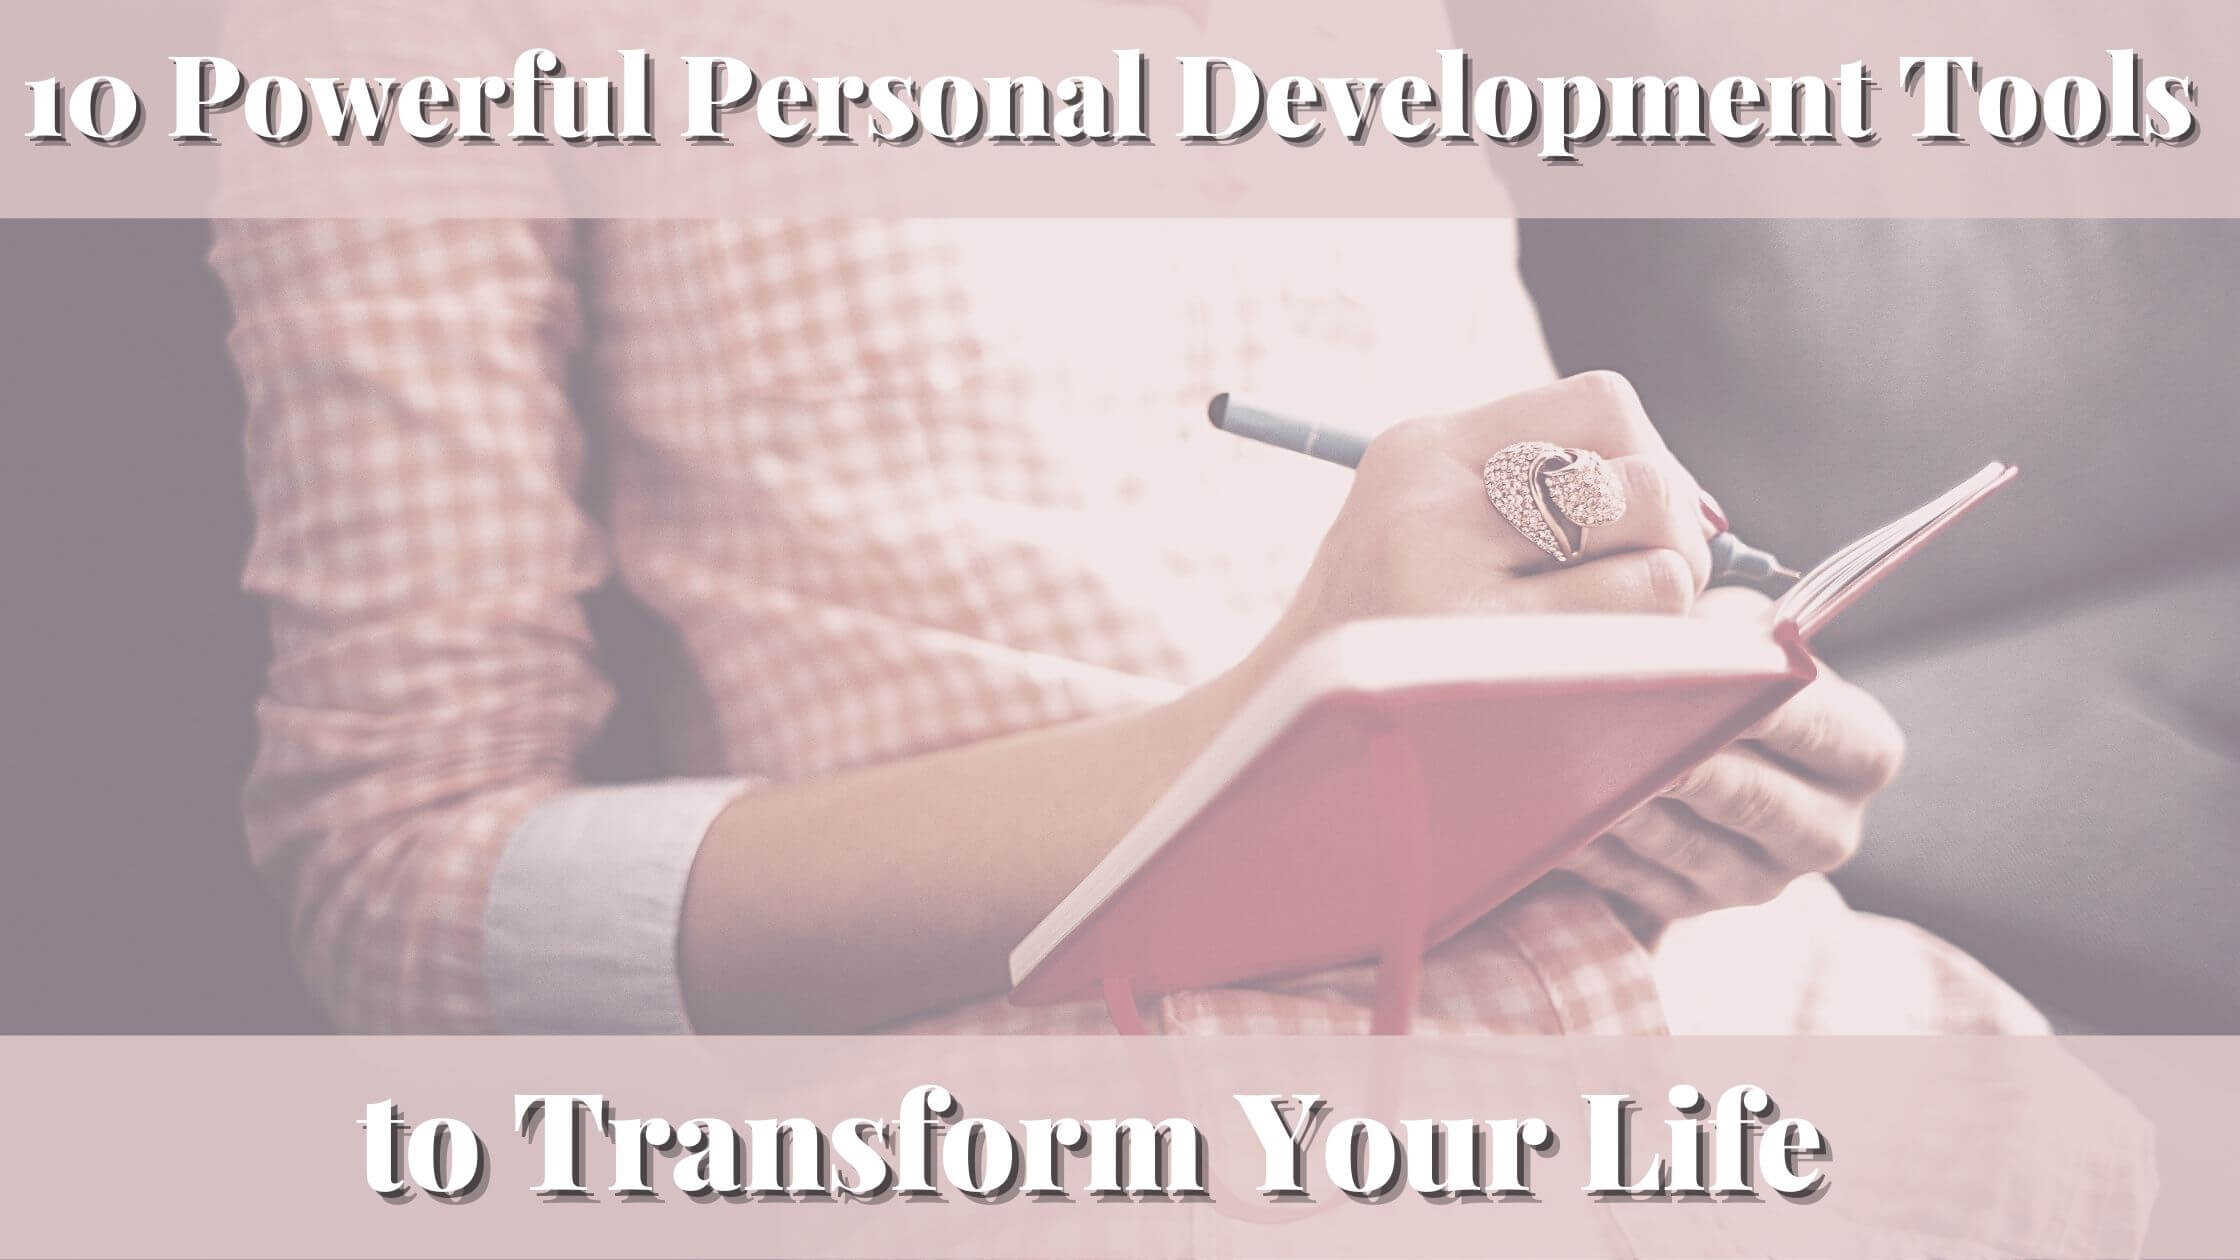 Woman writing in a journal 10 Powerful Personal Development Tools to Transform Your Life